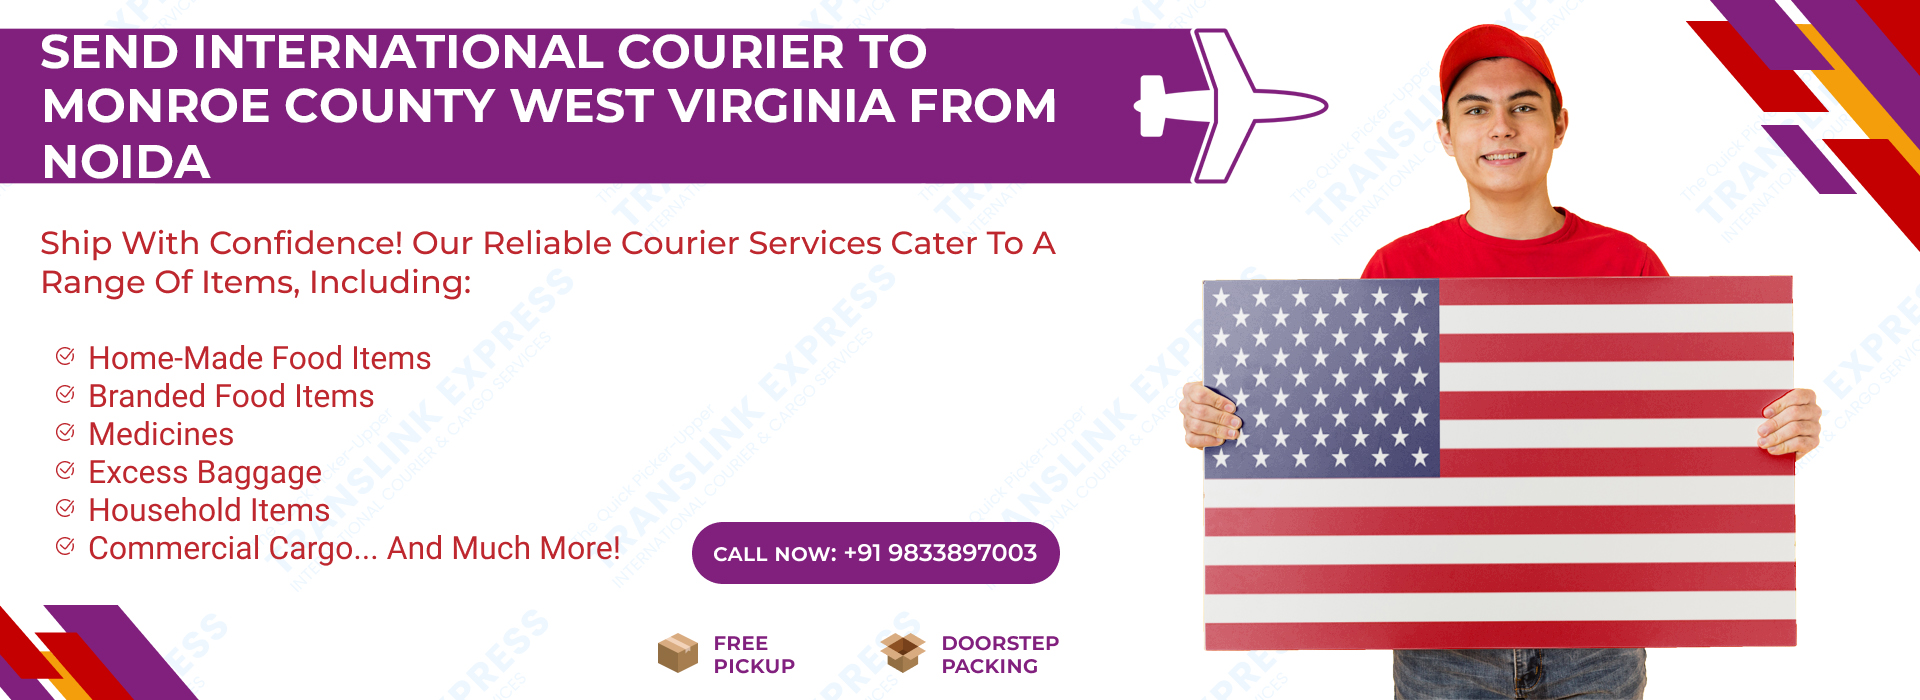 Courier to Monroe County West Virginia From Noida